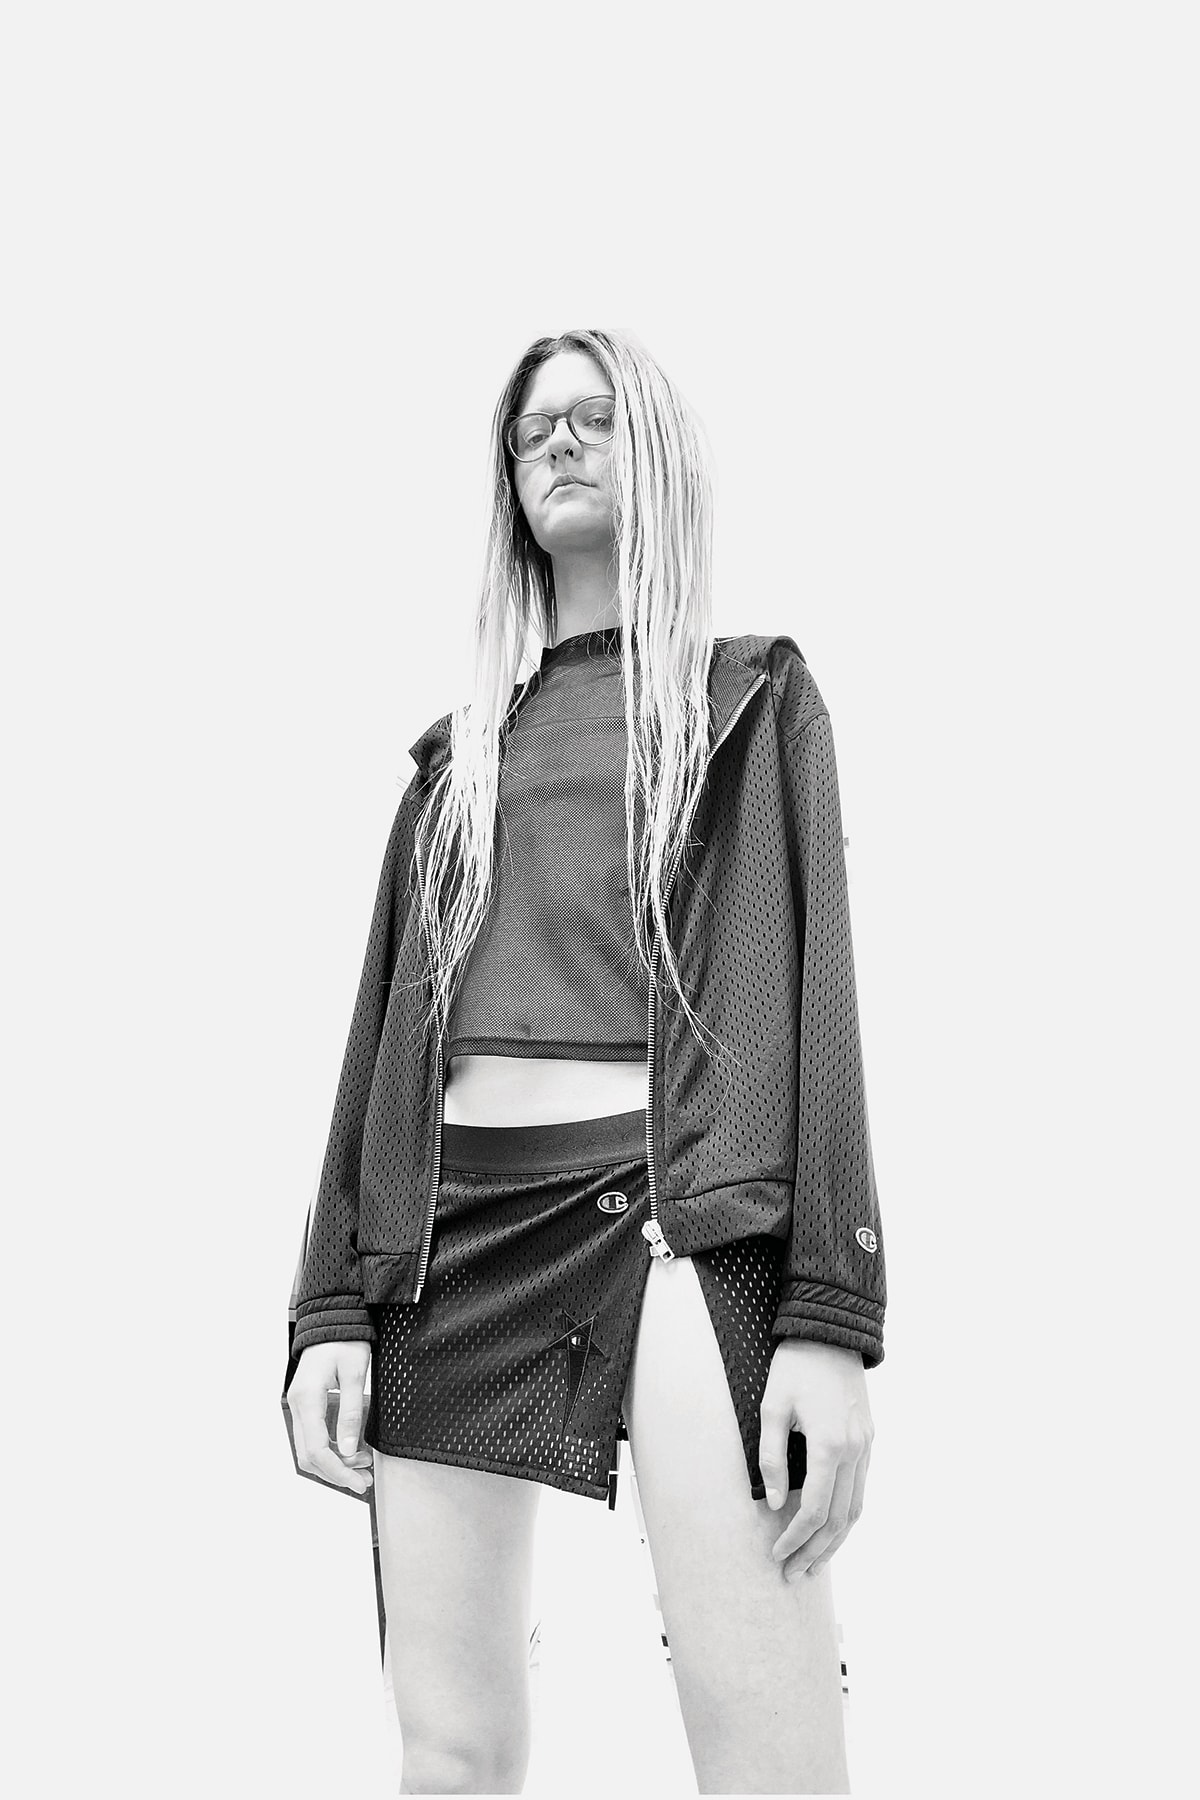 Rick Owens x Champion Collaboration Collection Campaign Skirt T-Shirt Hoodie